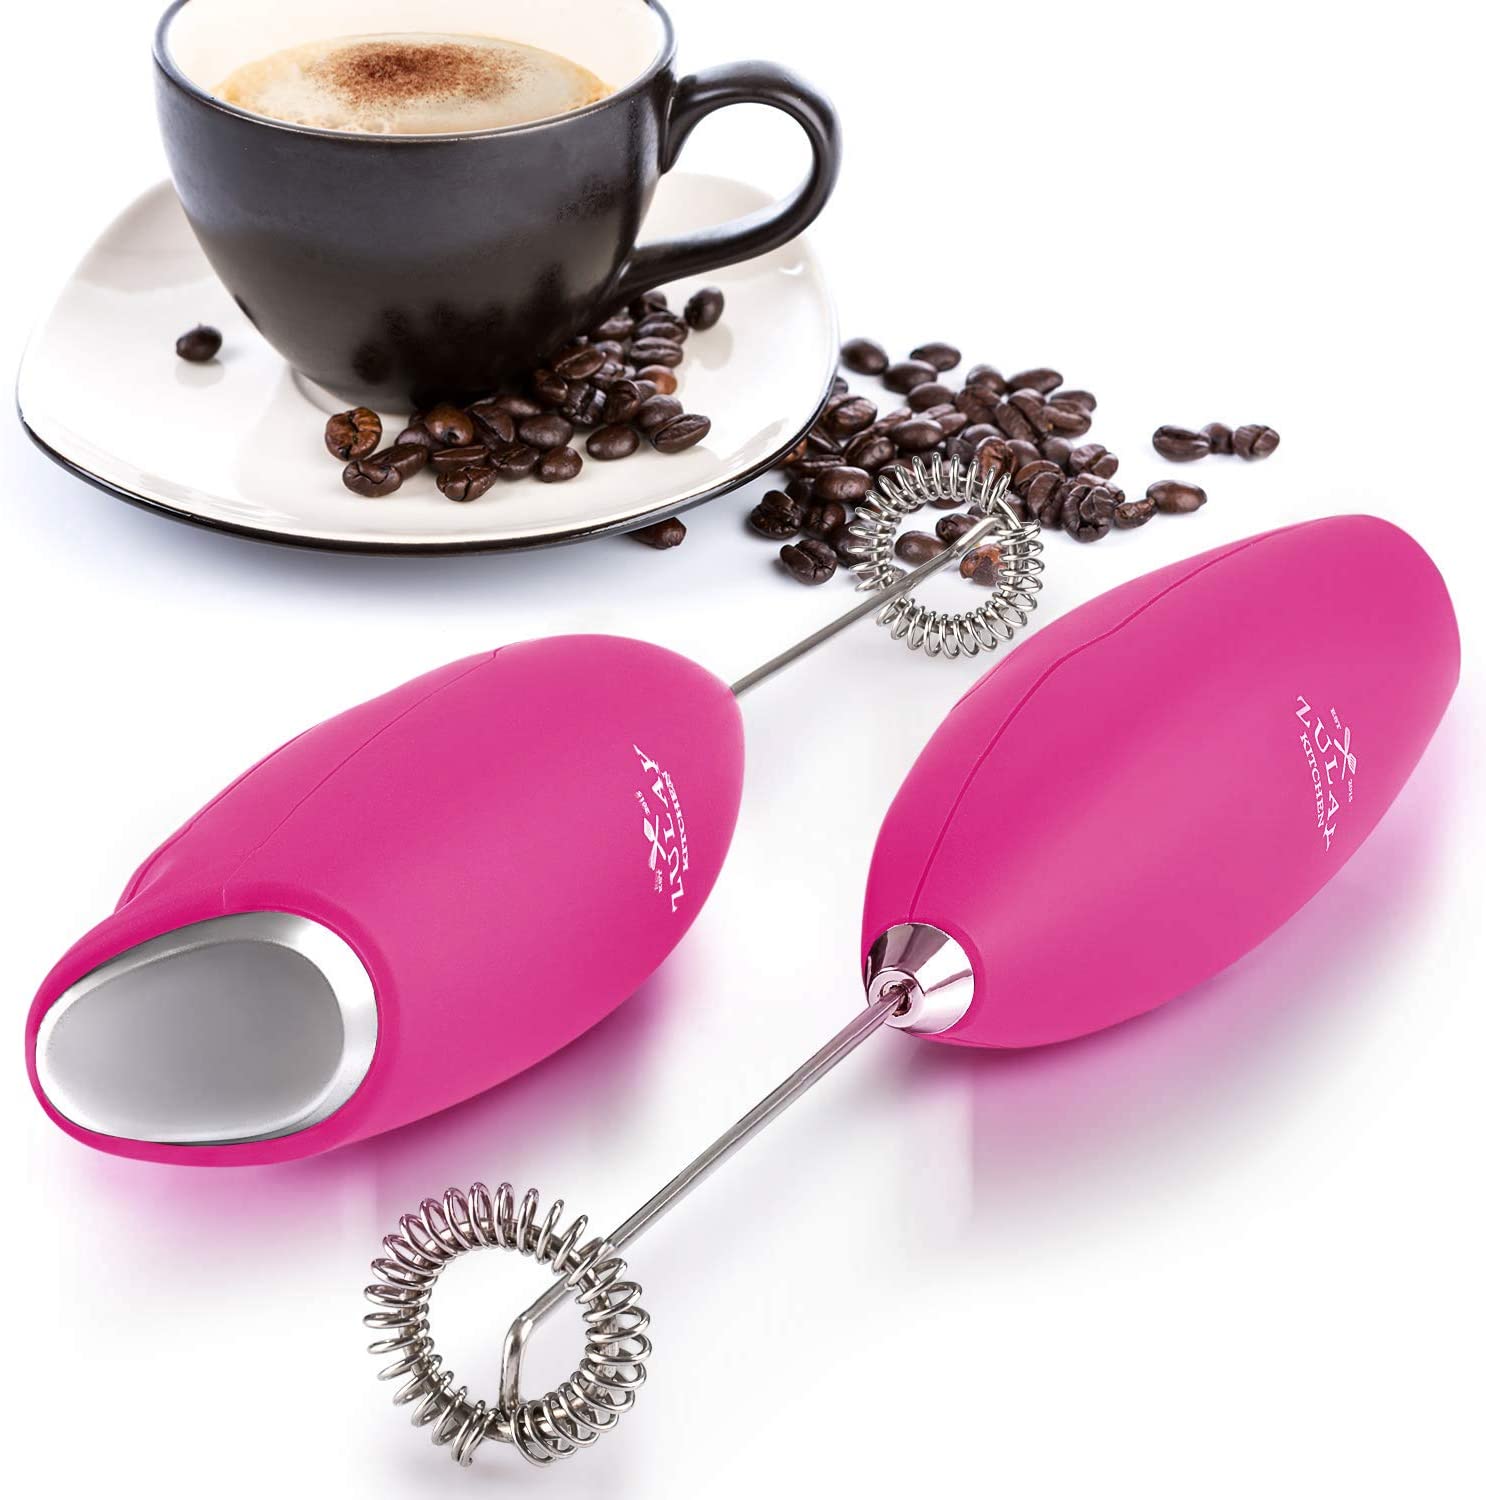 Zulay Kitchen Milk Frother - Plastic Coffee Maker Accessory for Whisking,  Tea, and Protein Powder - Easy to Clean and Store - Durable Metal Stand in  the Coffee Maker Accessories department at